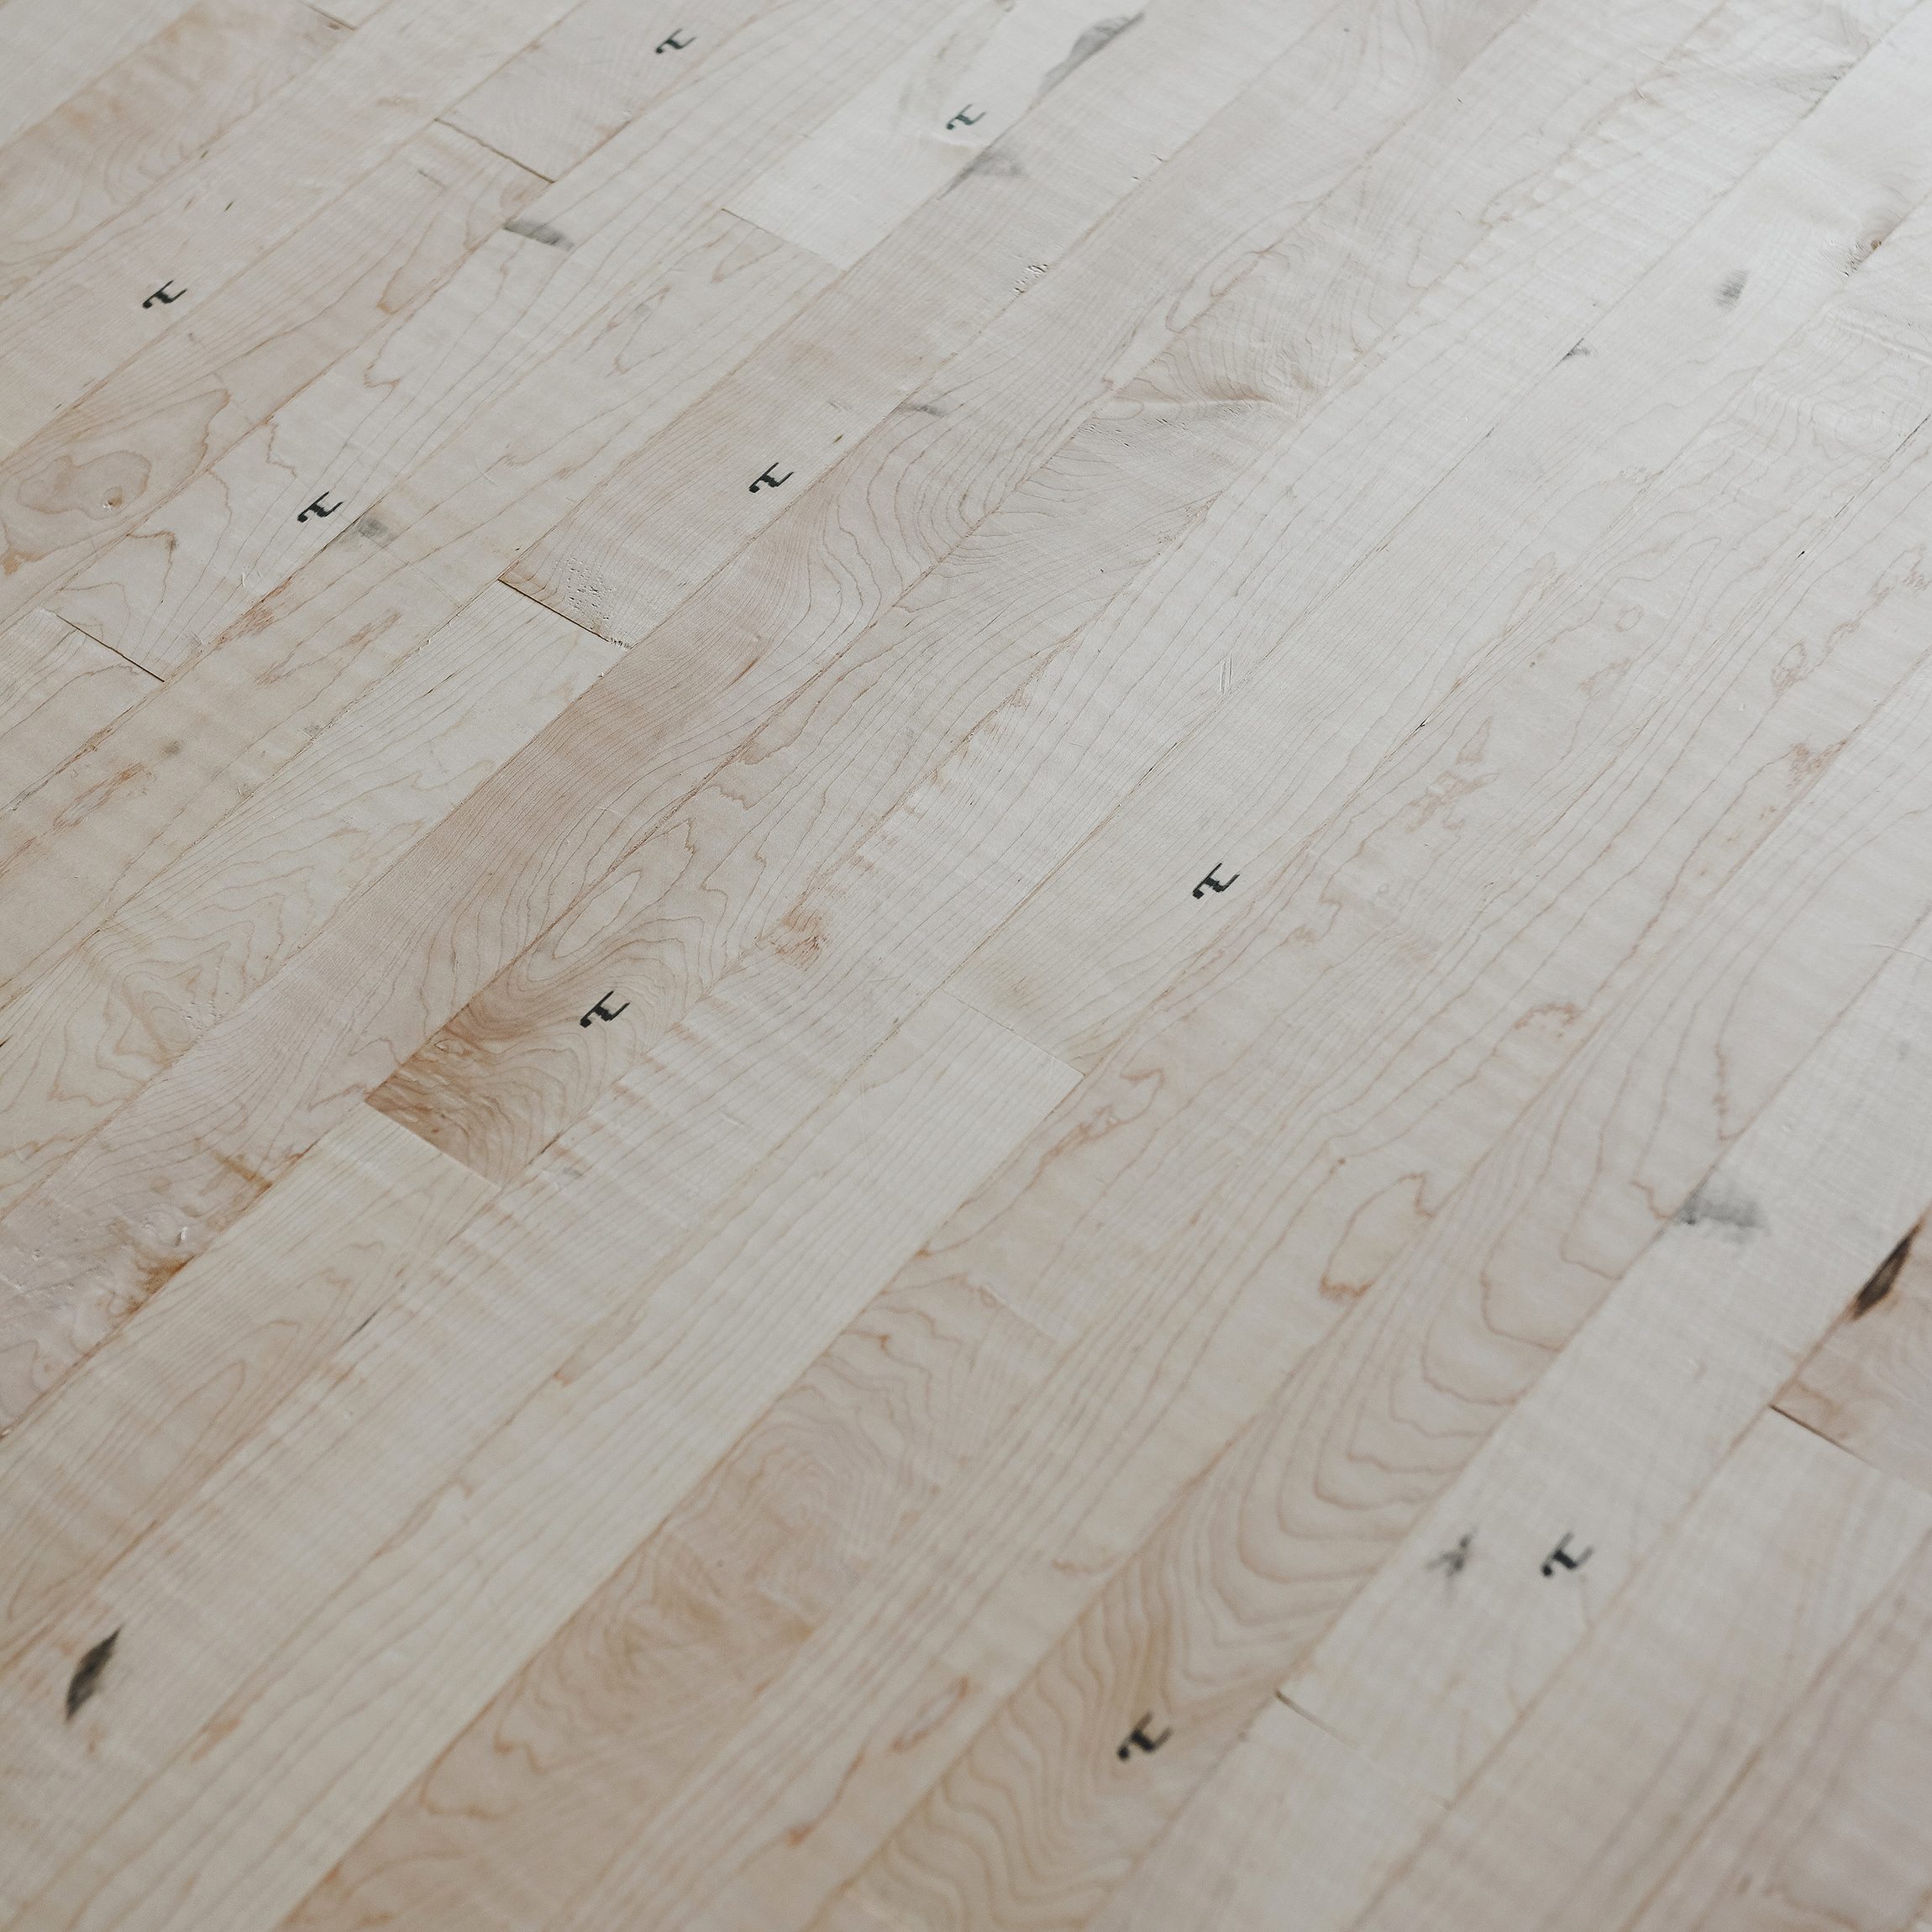 Newly installed maple hardwood floors, a close up | via Yellow Brick Home